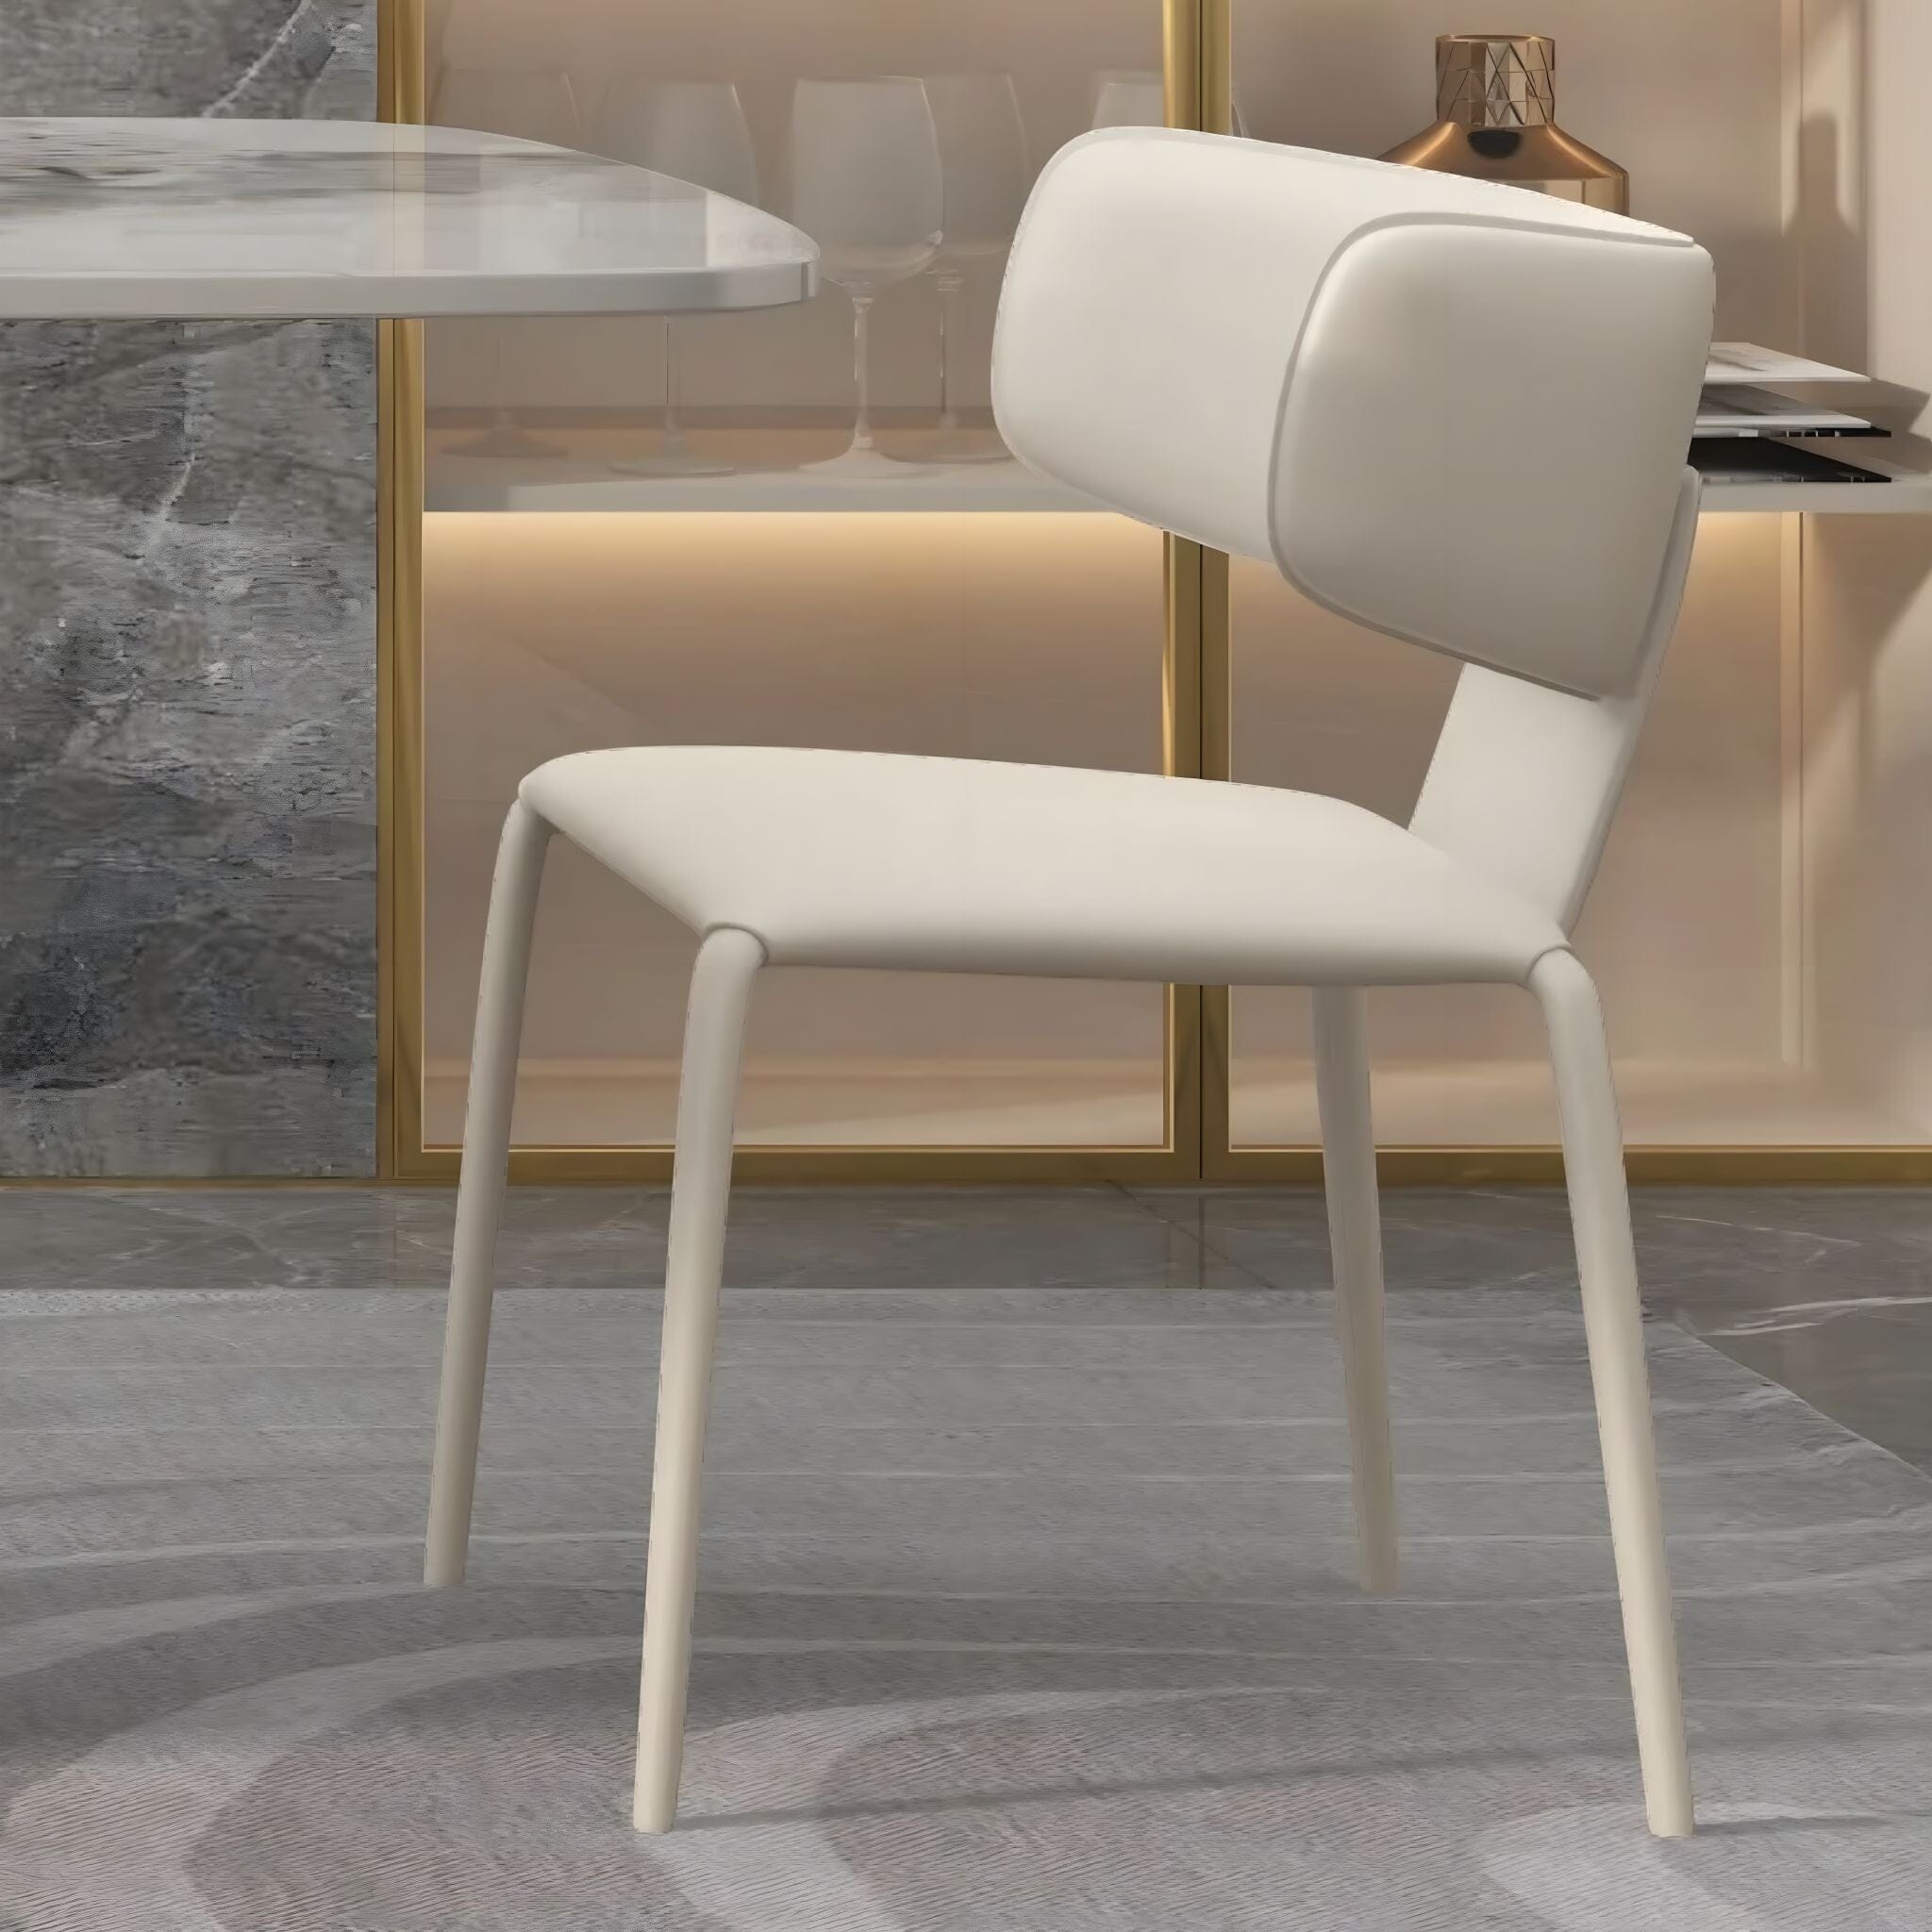 Sylvie Dining Chairs Chair 